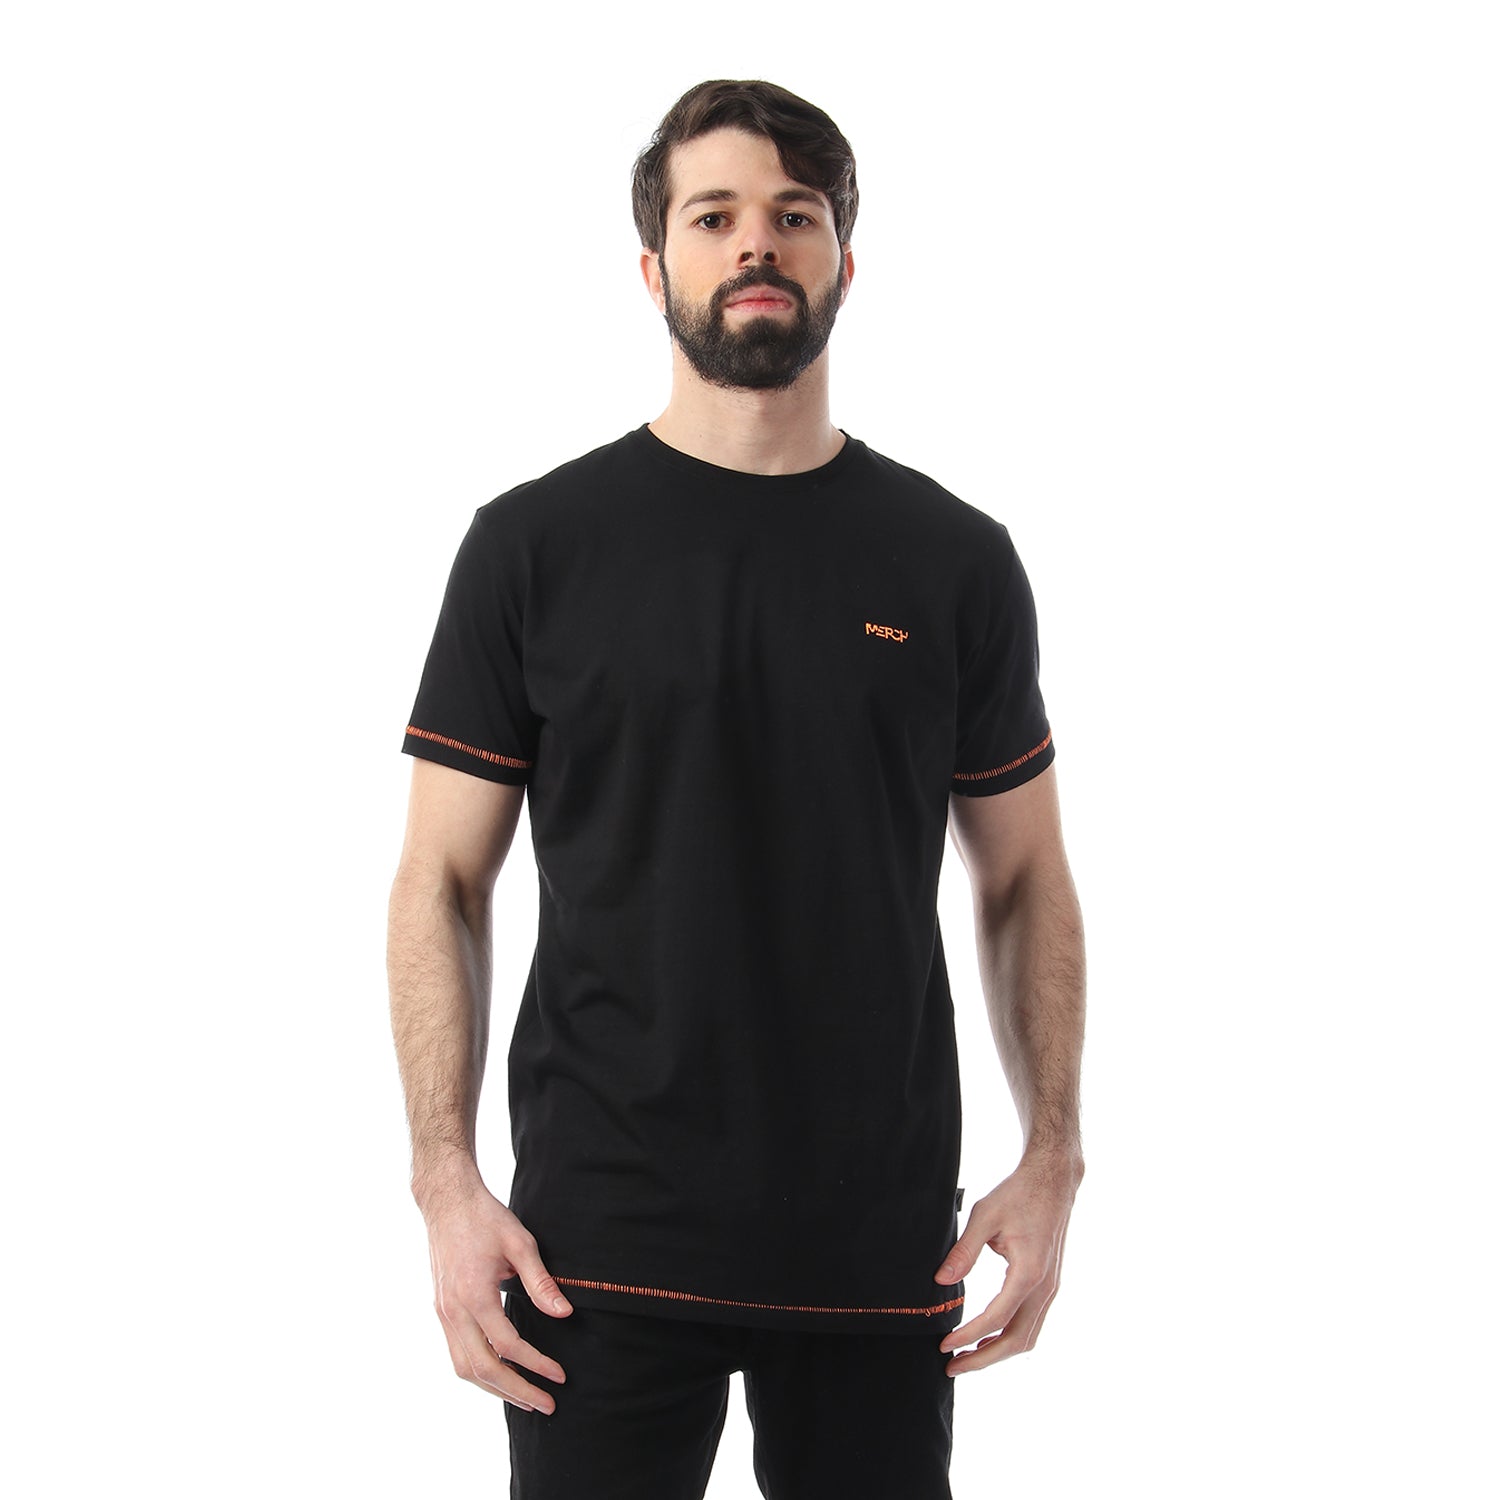 Basic Tshirt With Contrast Stitching For Men -110504005